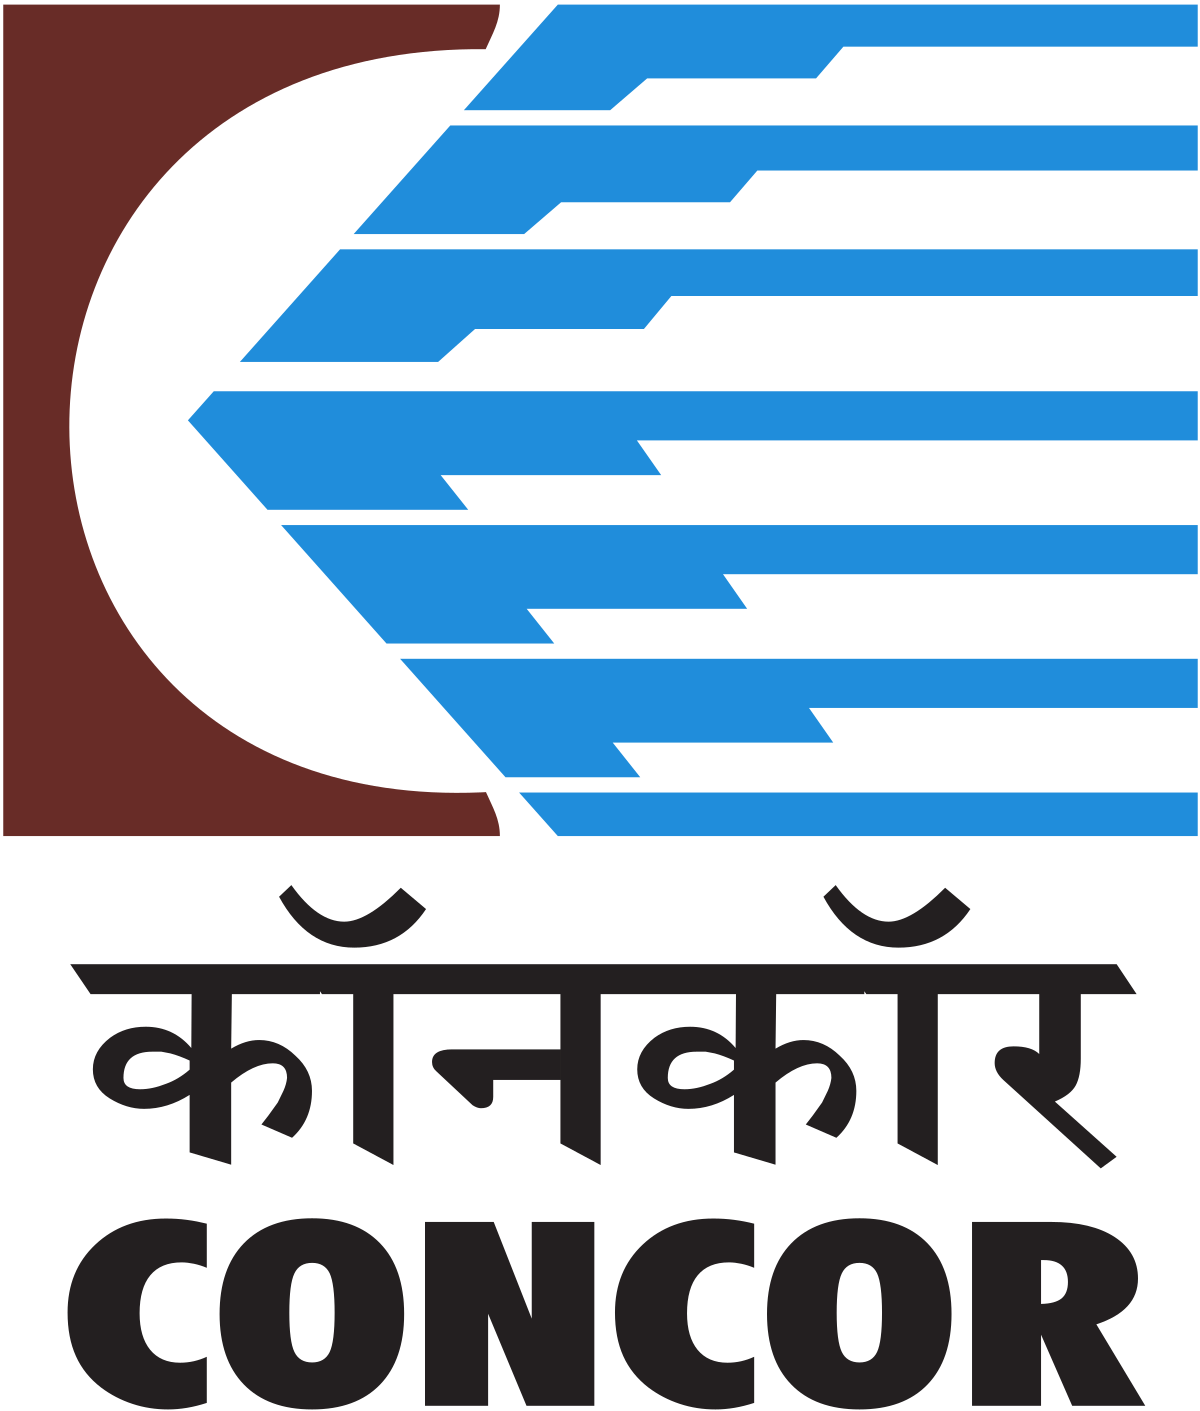 Container Corporation of India - Wikipedia